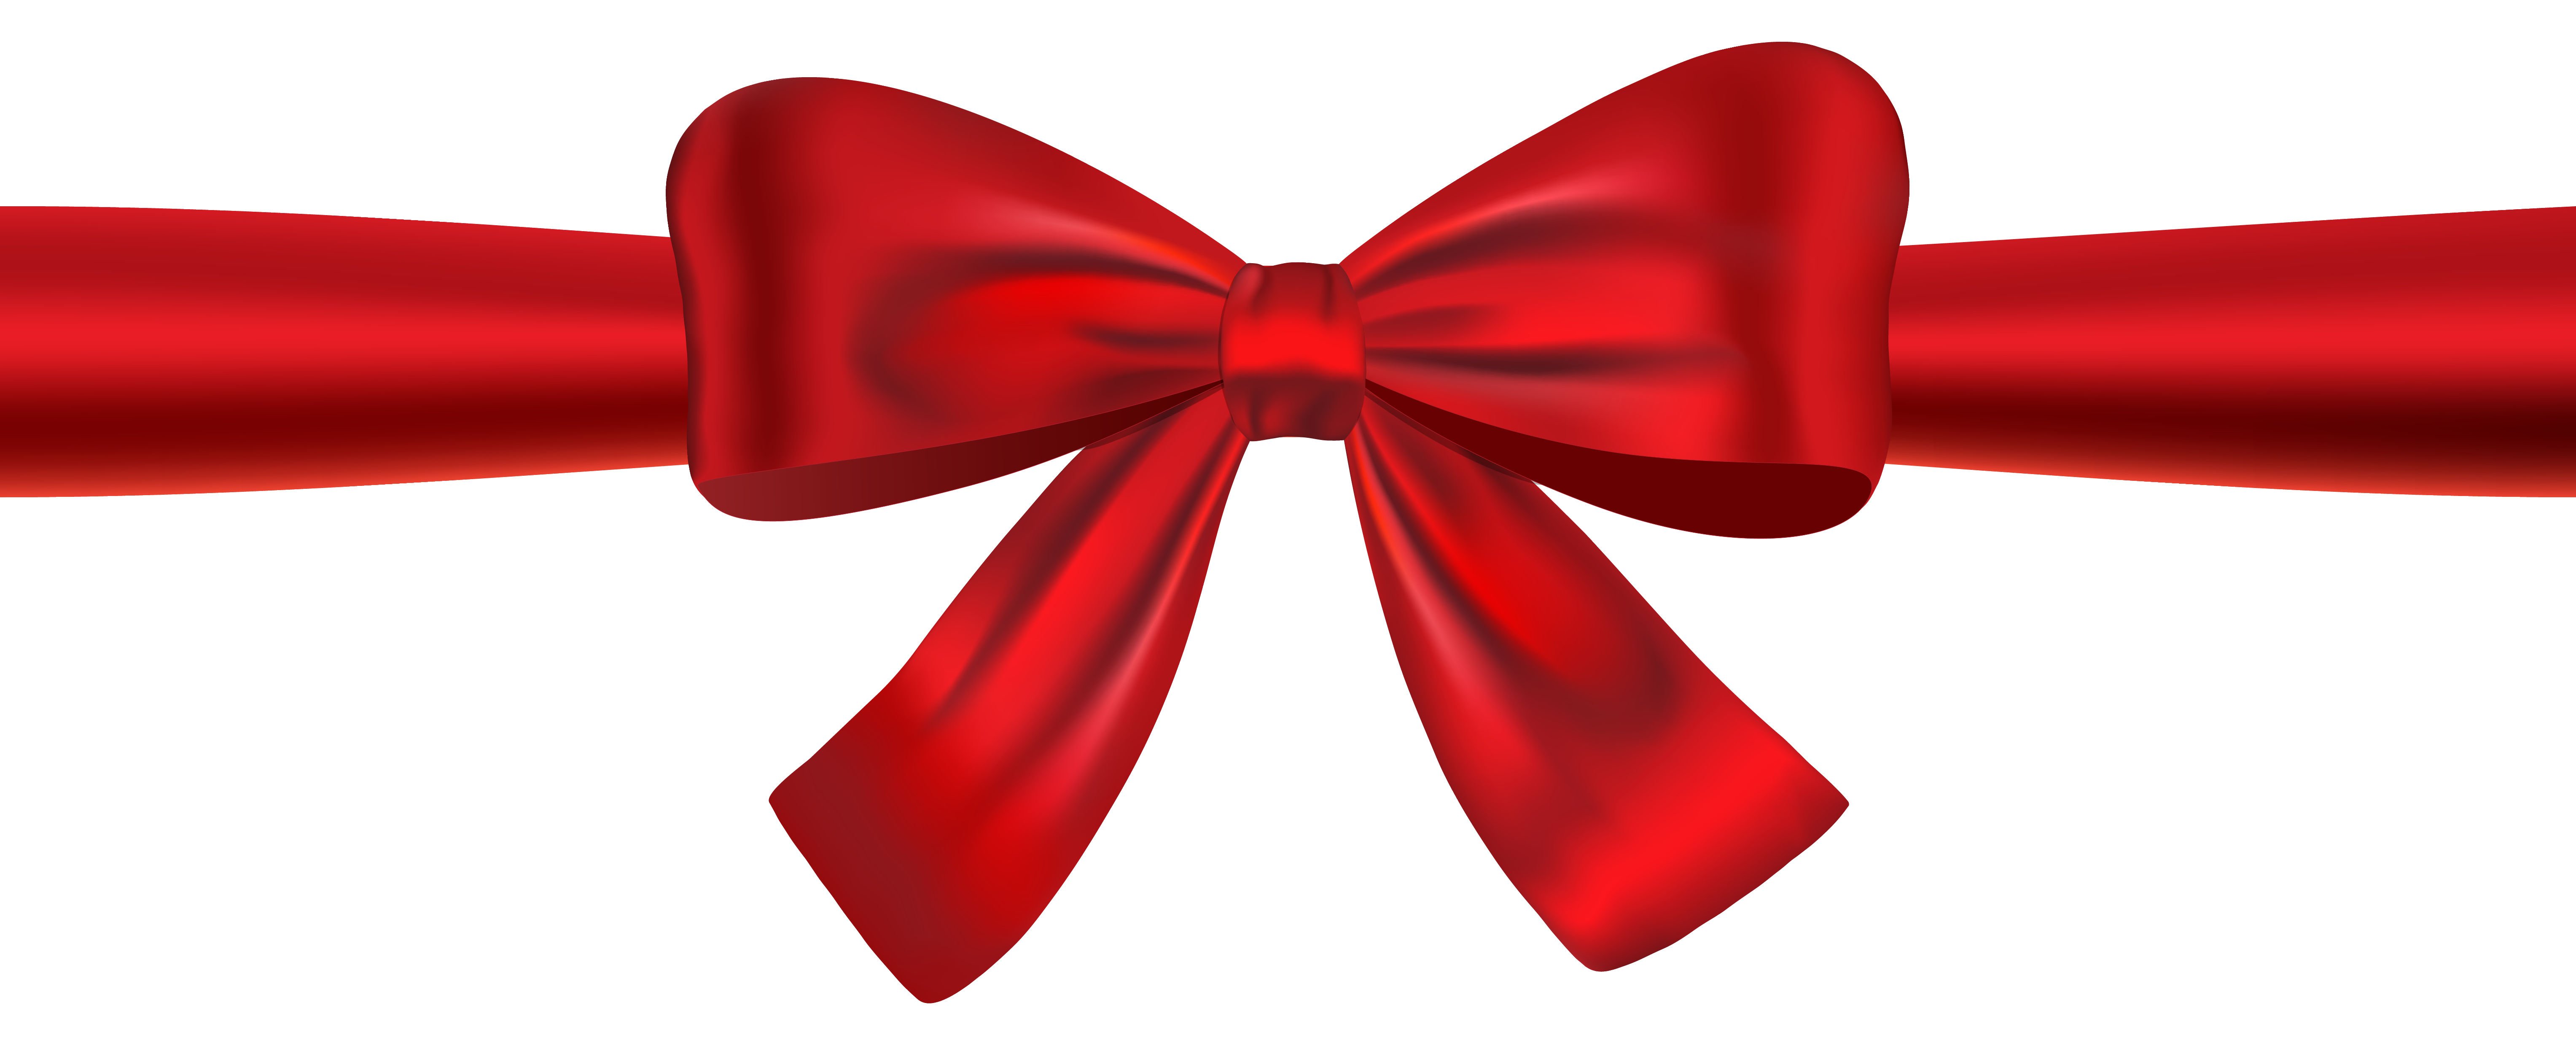 Ribbon Clipart to Download - dbclipart.com